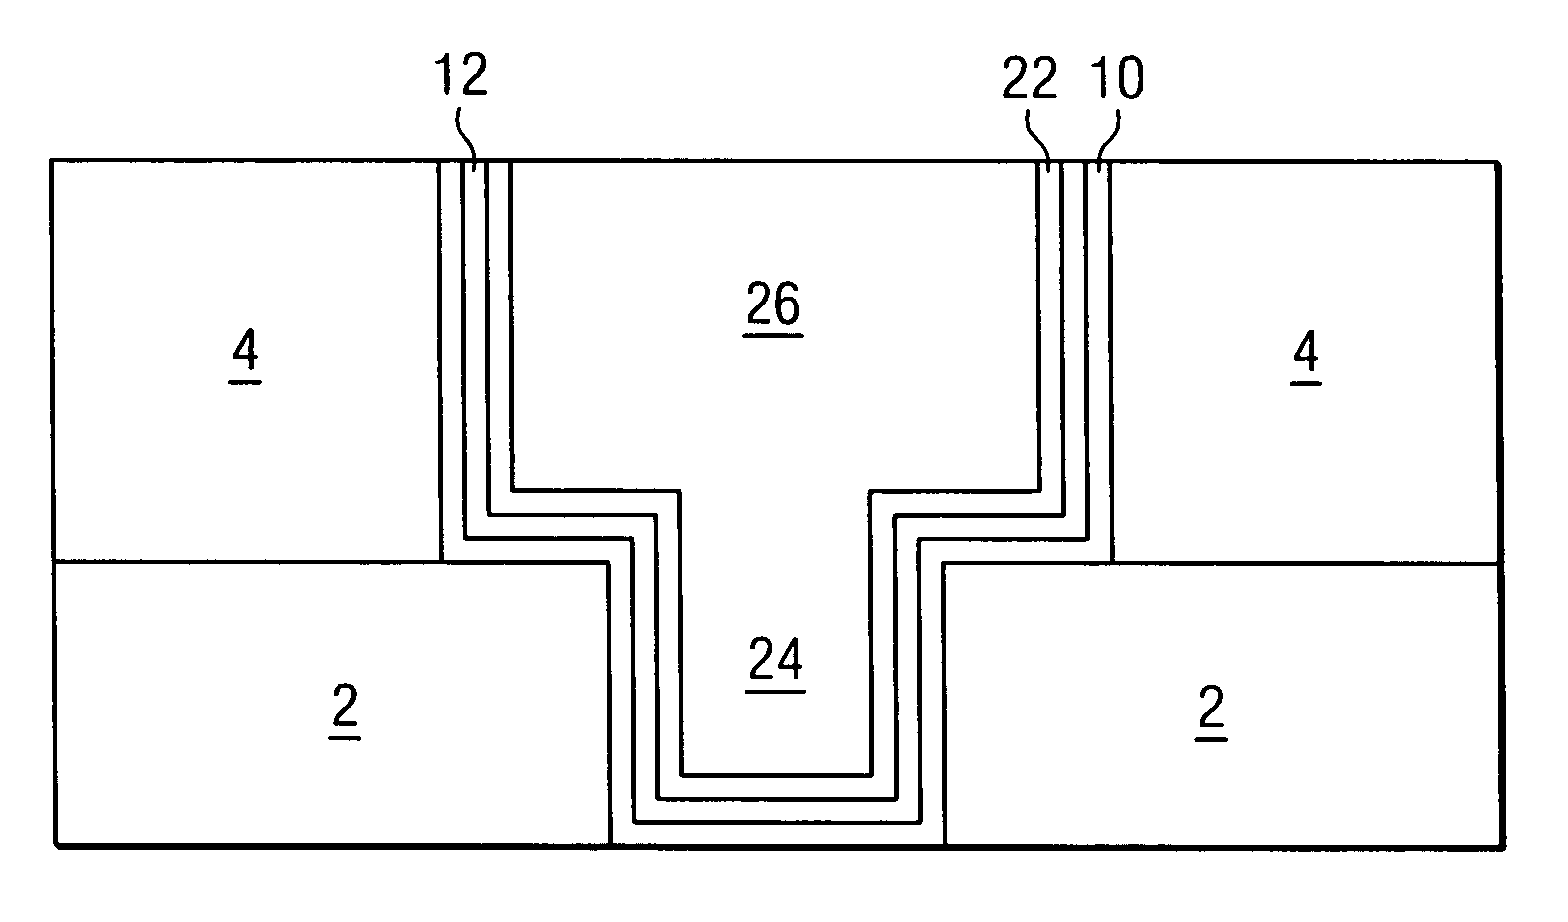 Reducing resistivity in interconnect structures by forming an inter-layer